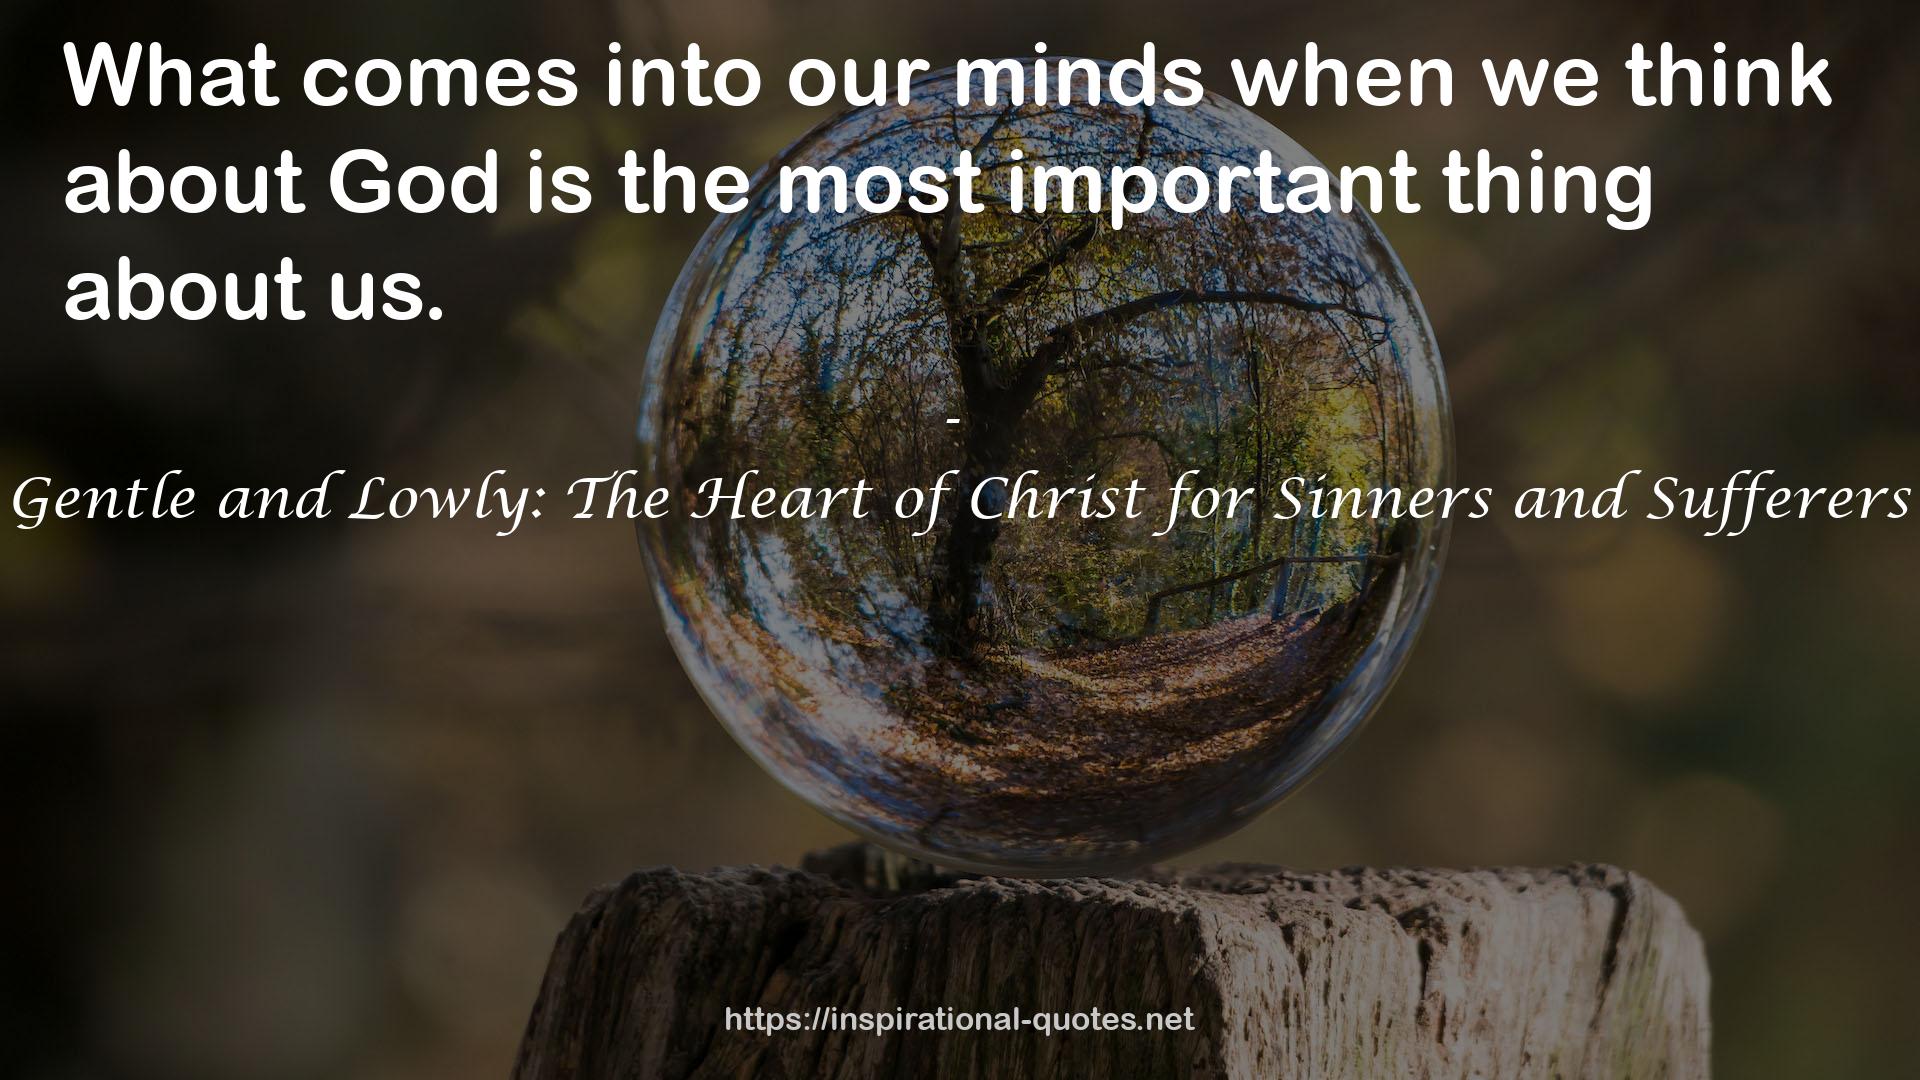 Gentle and Lowly: The Heart of Christ for Sinners and Sufferers QUOTES